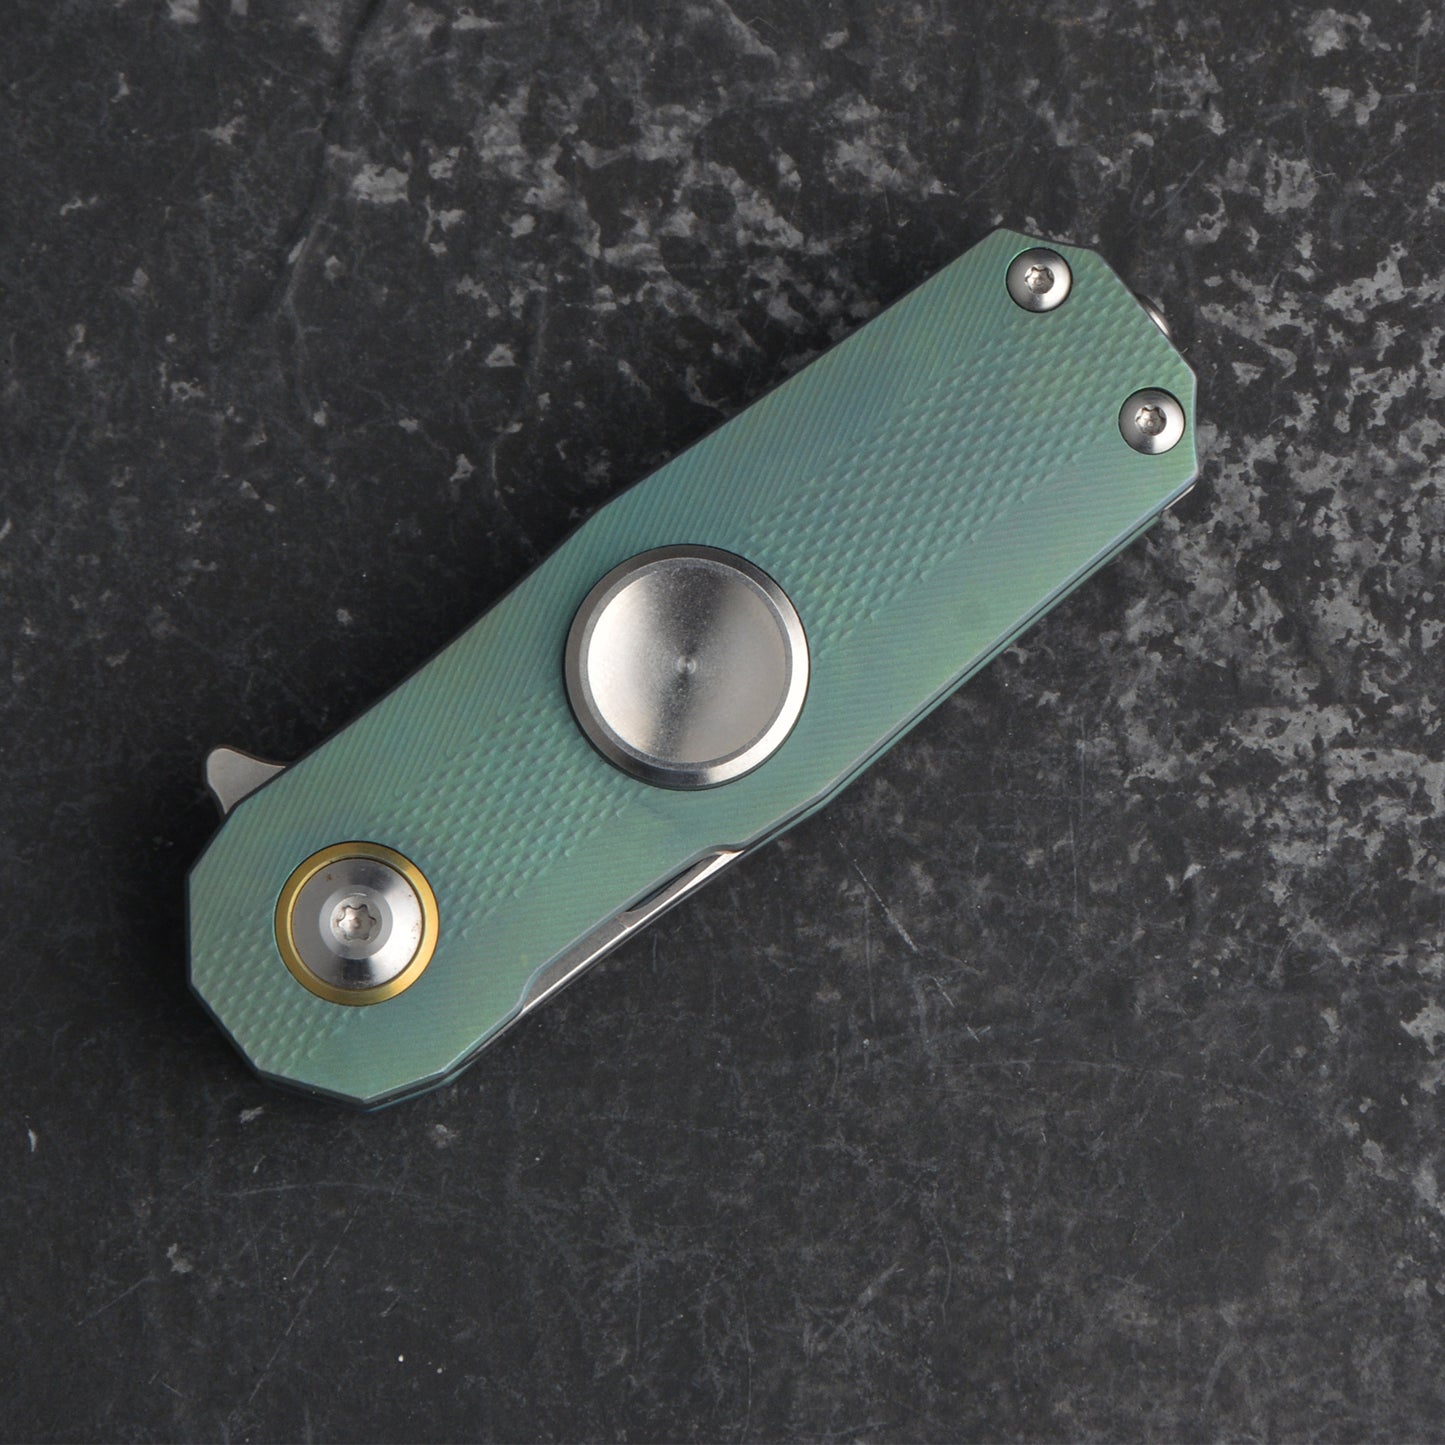 CH Spinner S35VN Ti Handle Folding Knife